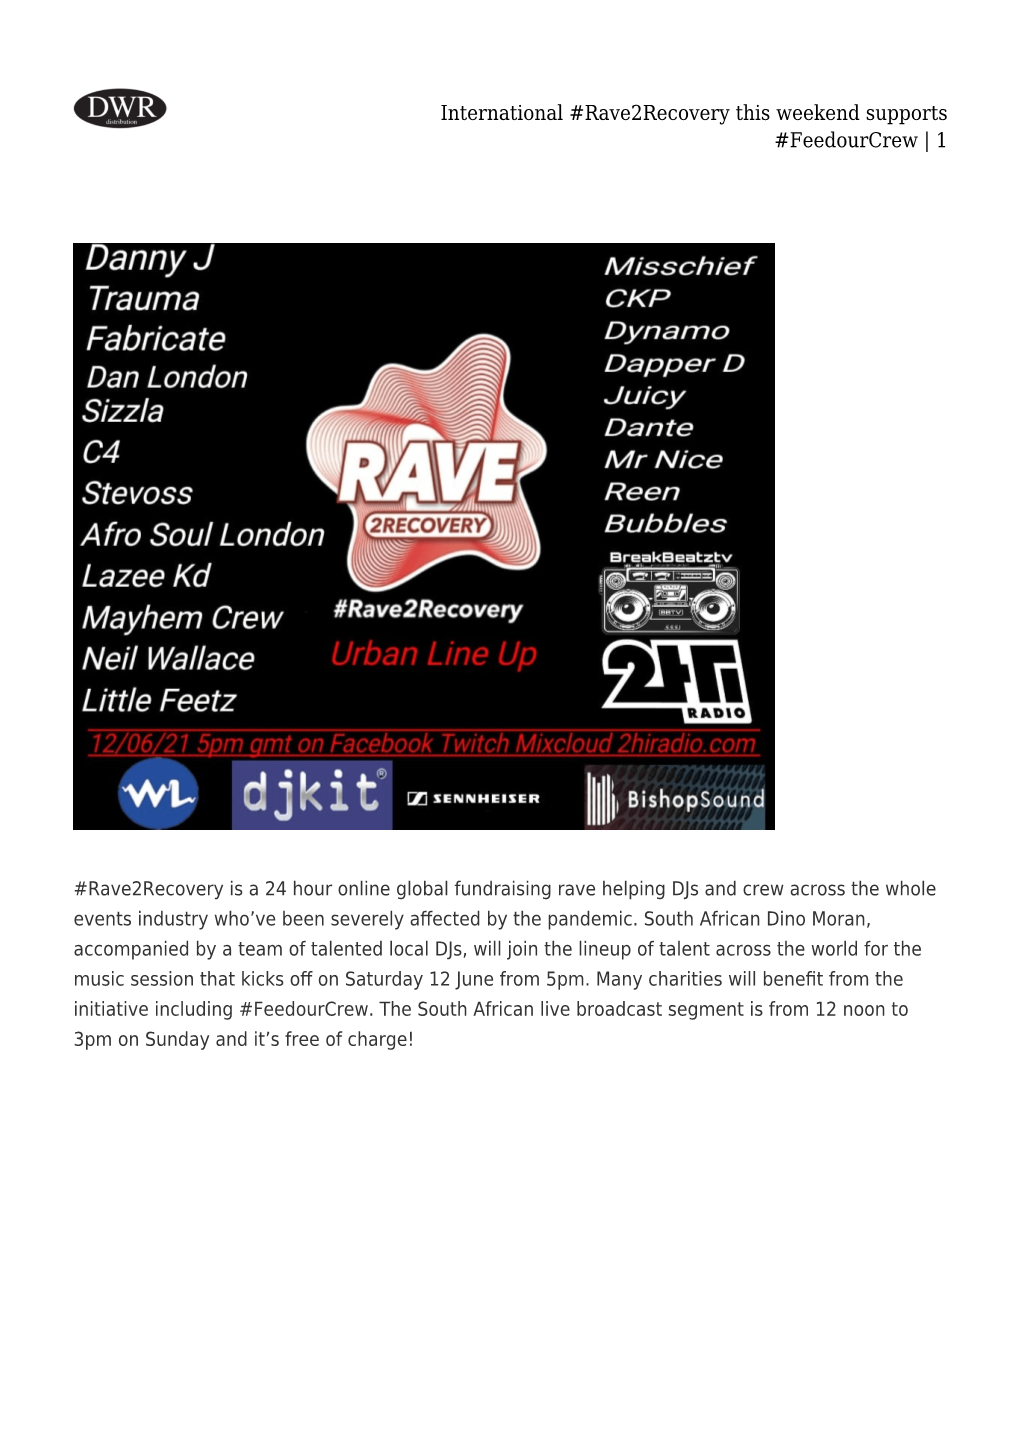 International #Rave2recovery This Weekend Supports #Feedourcrew | 1